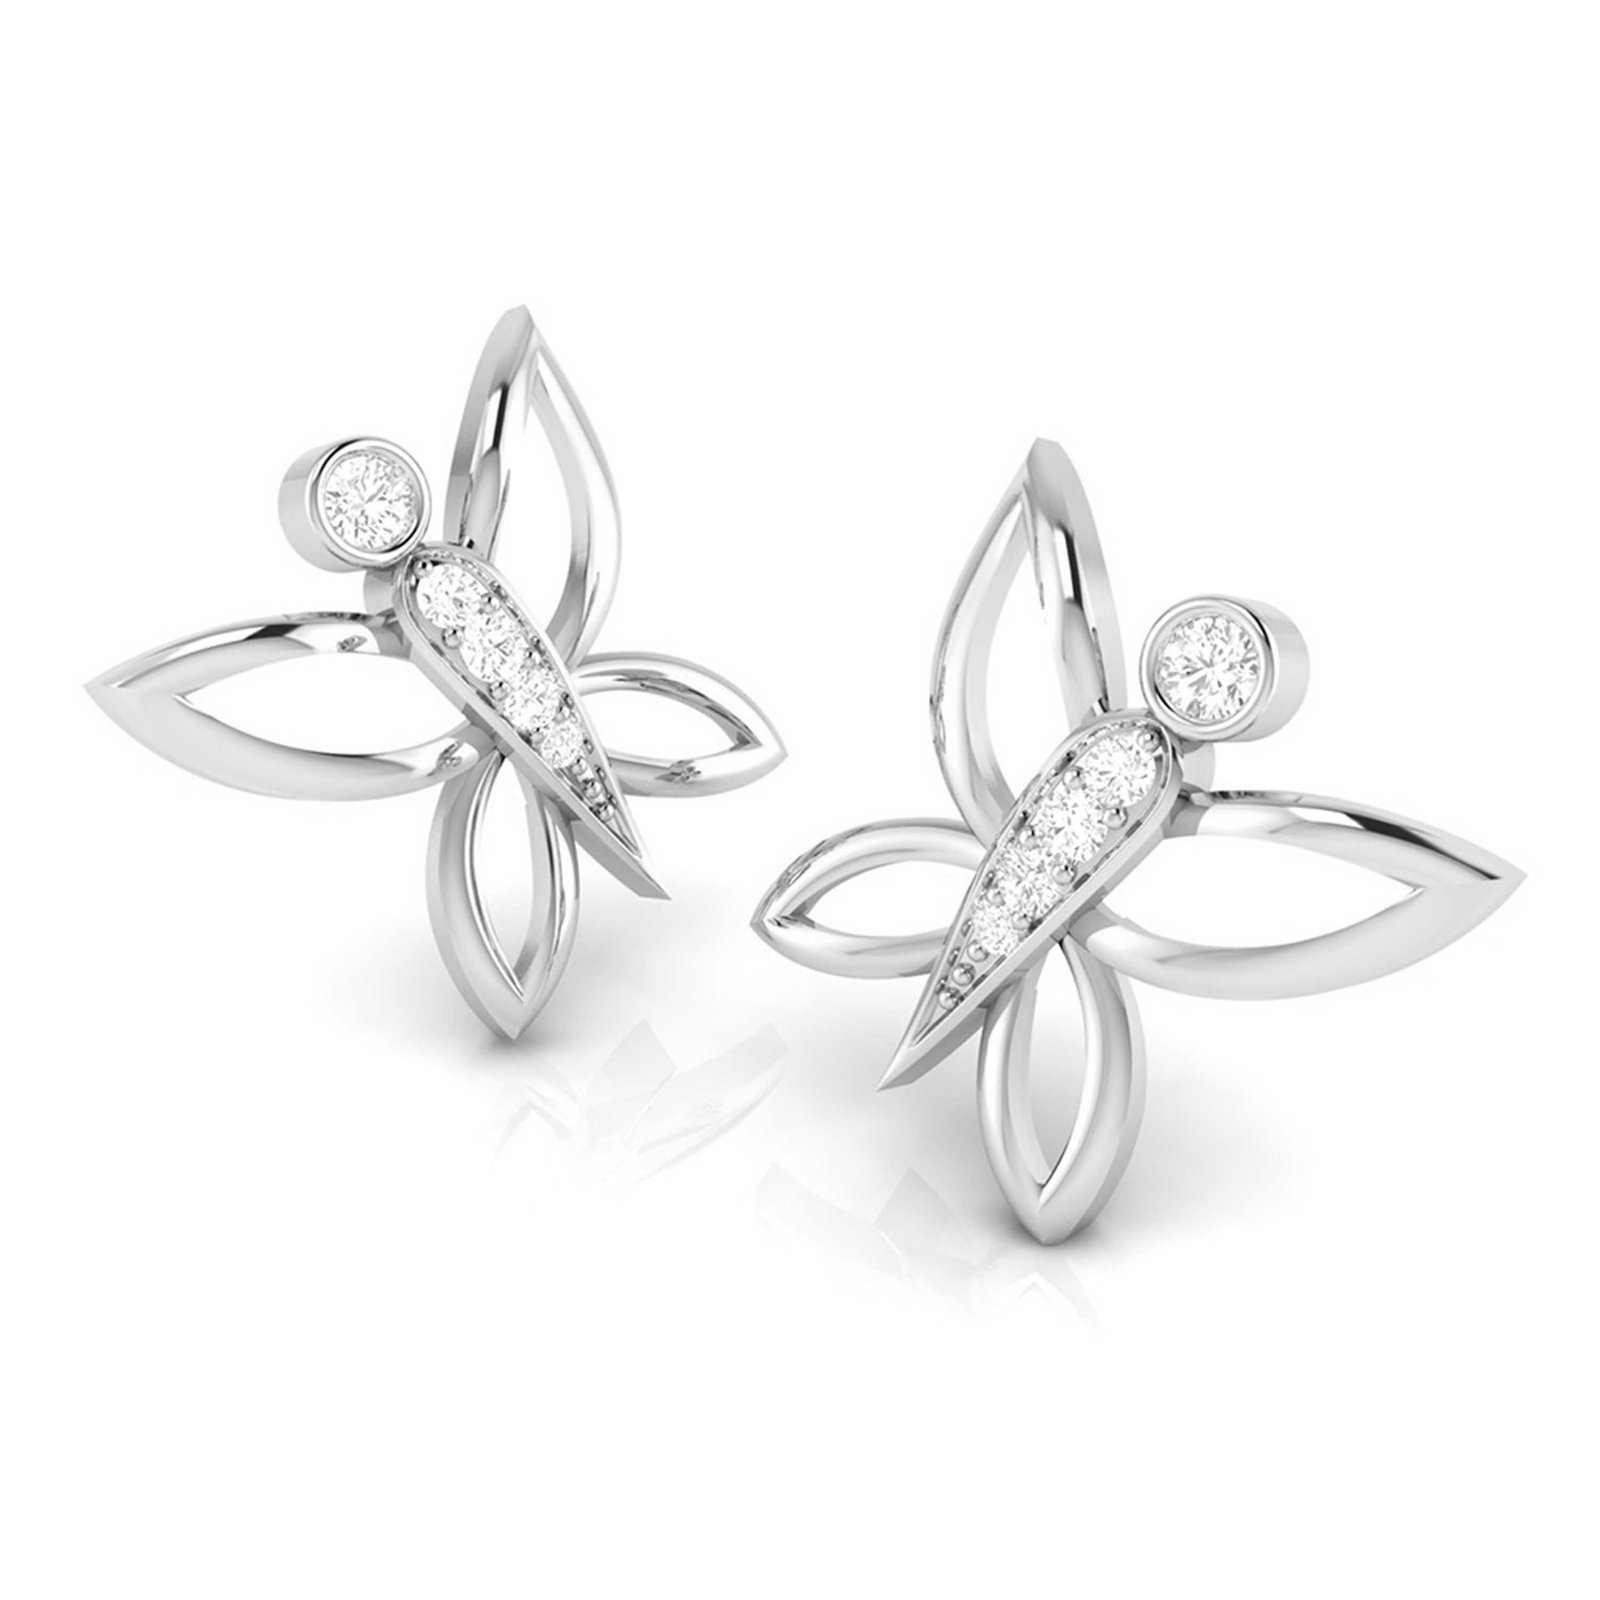 Cheering Butterfly Diamond Earring In Pure Gold By Dhanji Jewels